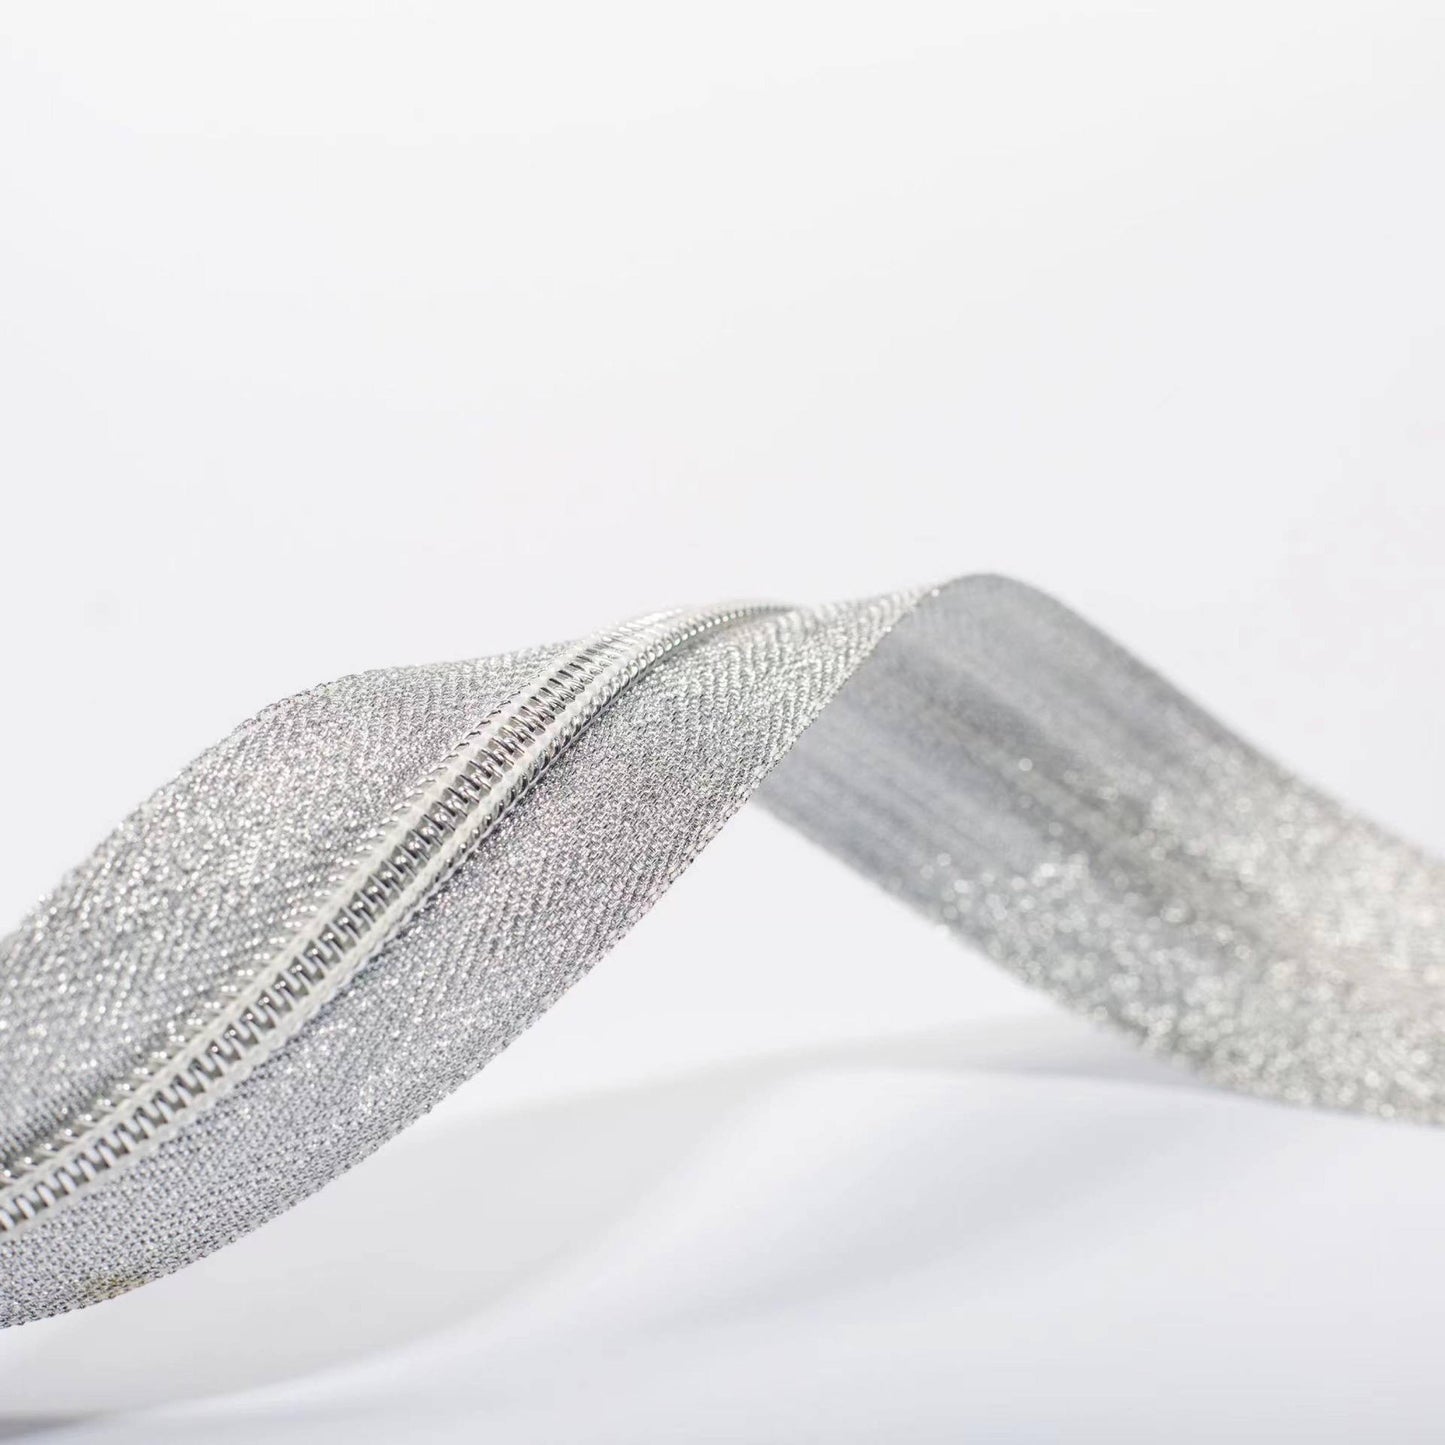 SHIMMERING SILVER TAPE WITH SILVER TEETH #5 ZIPPER TAPE